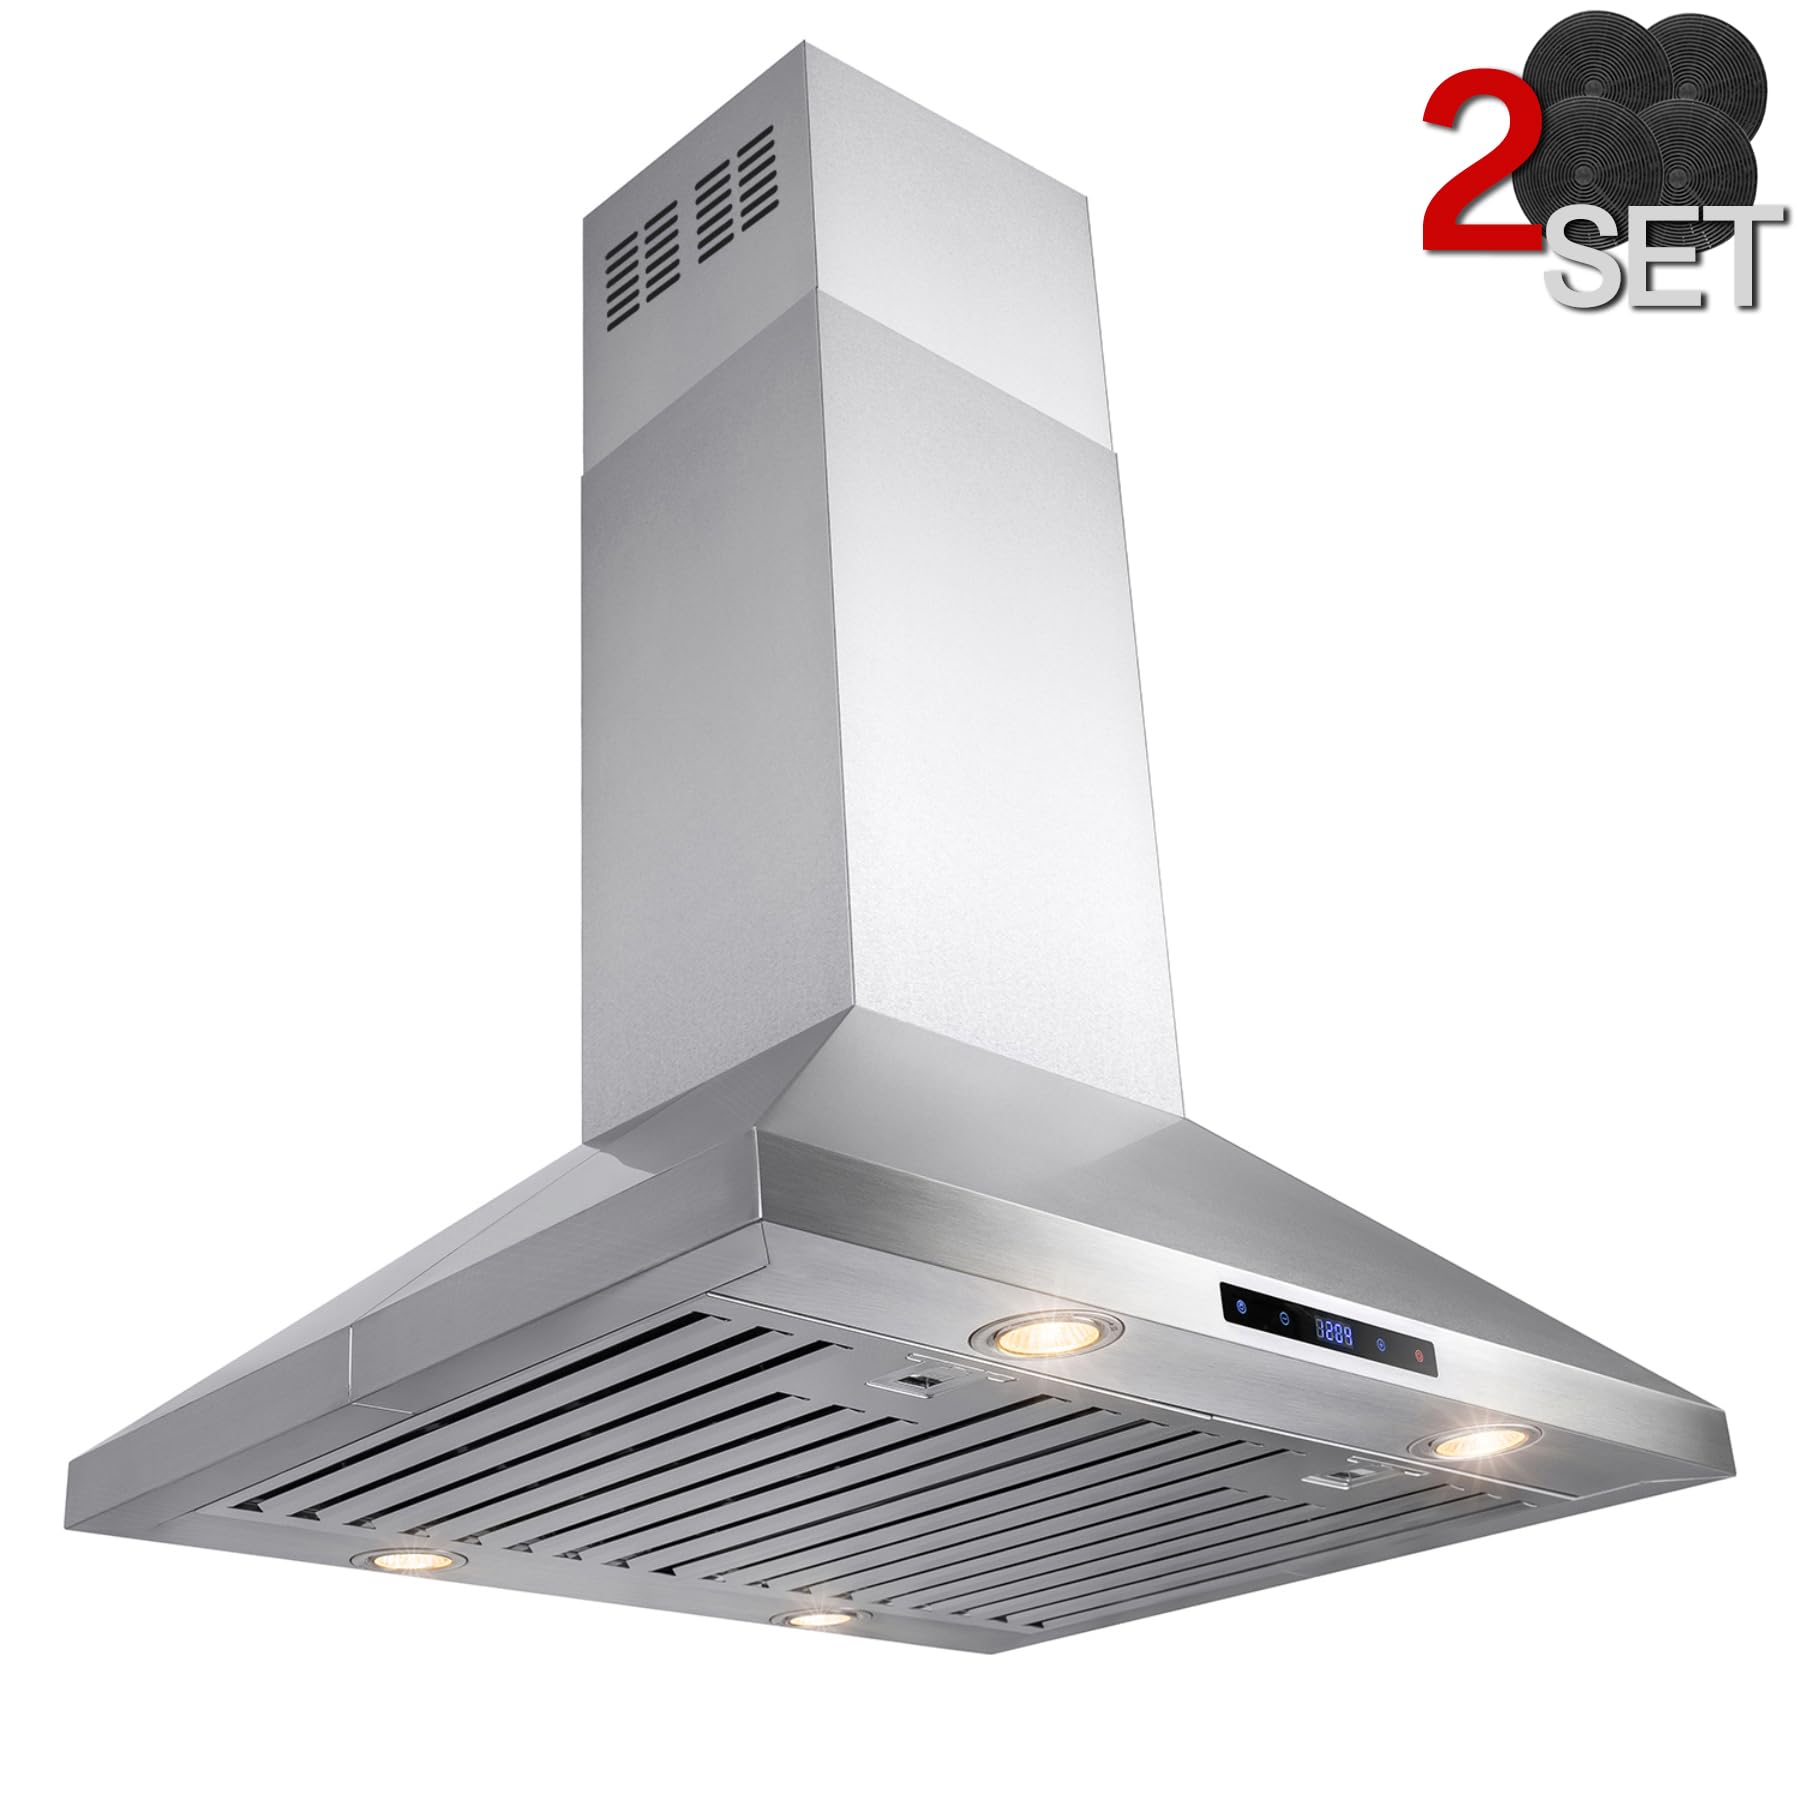 AKDY 30 in. Island Mount Range Hood, 4-Speed Fan and LED Lights in Stainless Steel, Convertible Range Hood Ducted to Ductless with 2-Sets of Carbon Filters